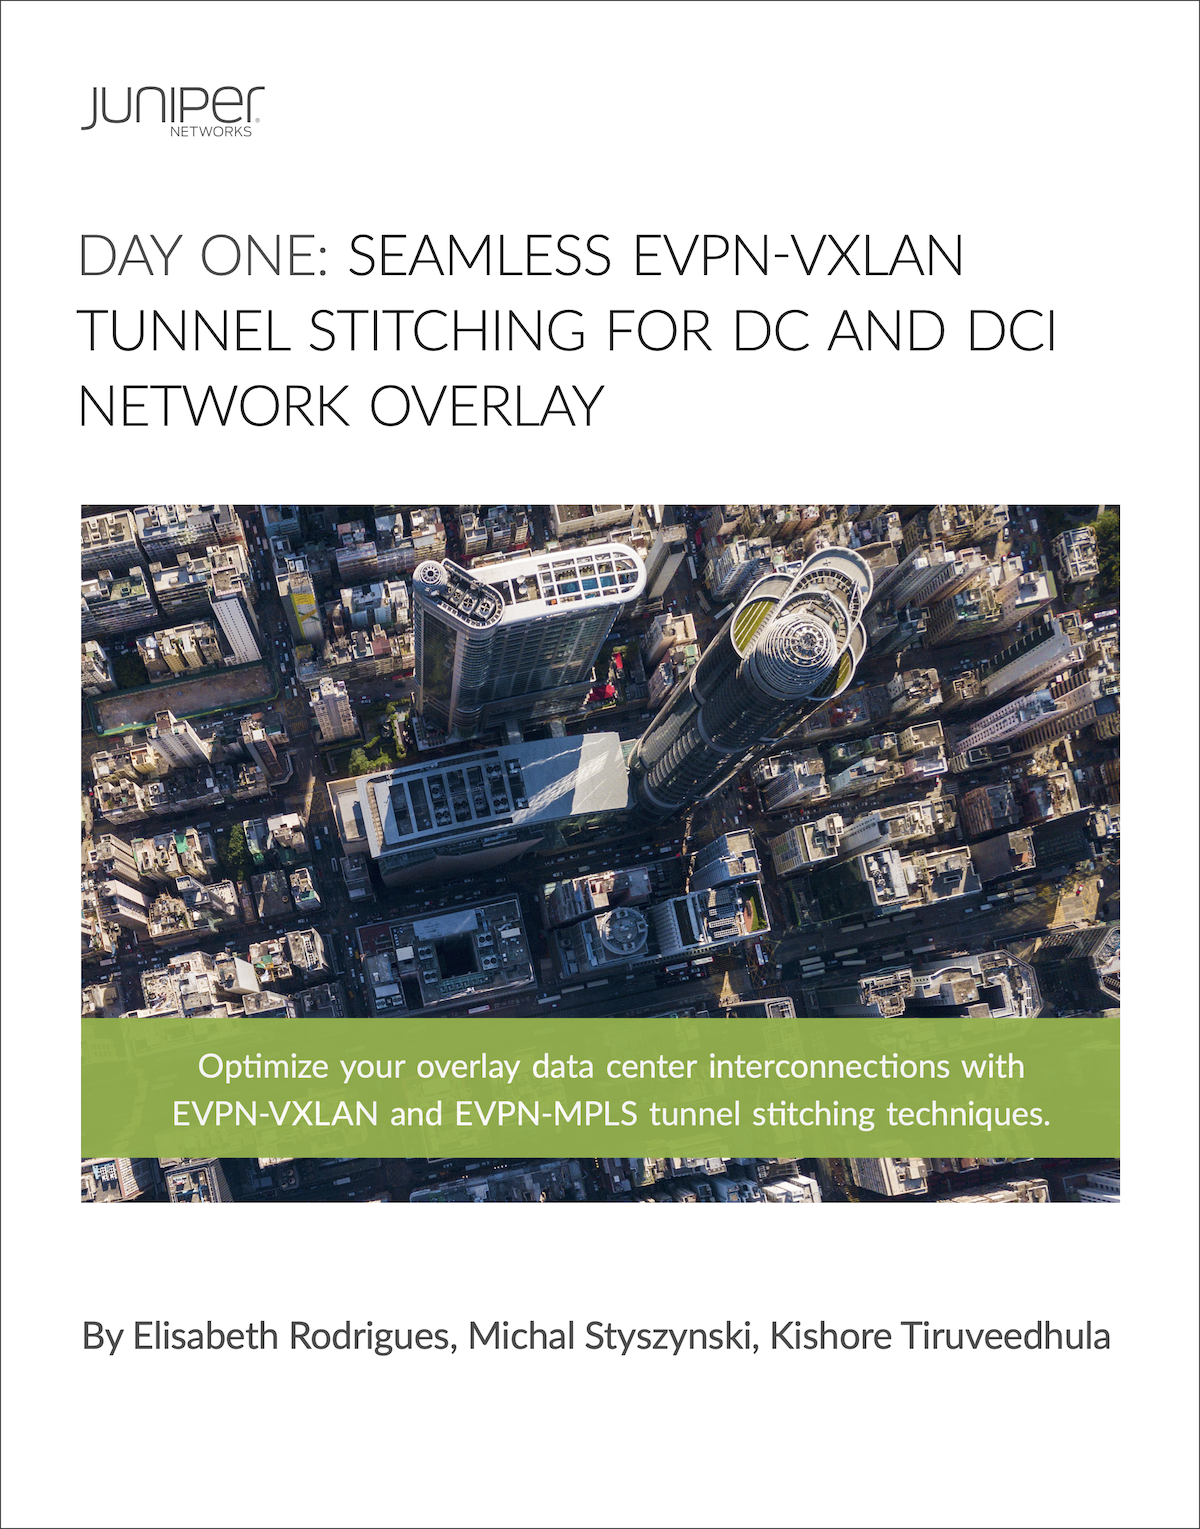 Day One: Seamless EVPN-VXLAN Tunnel Stitching for DC and DCI Network Overlay